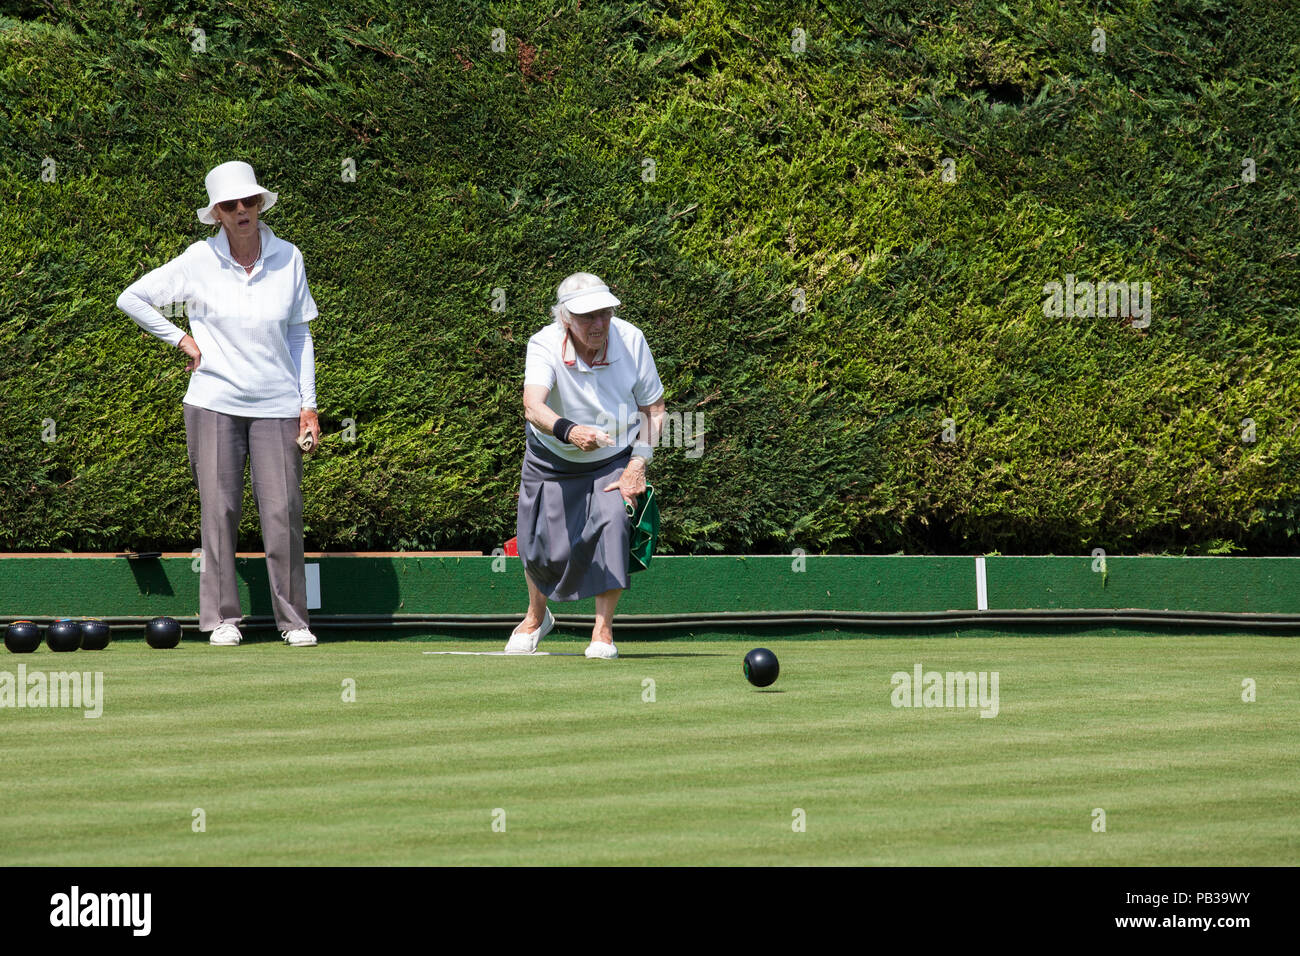 Windsor, UK. 26th July, 2018. Two women enjoy a game of bowls on a still pristine lawn at the Windsor and Eton Bowling Club on a very hot summer's day. Temperatures are expected to reach 36C today in the south-east. Even if imposed, sports facilities such as bowling clubs are often exempt from water restrictions during a drought. Credit: Mark Kerrison/Alamy Live News Stock Photo